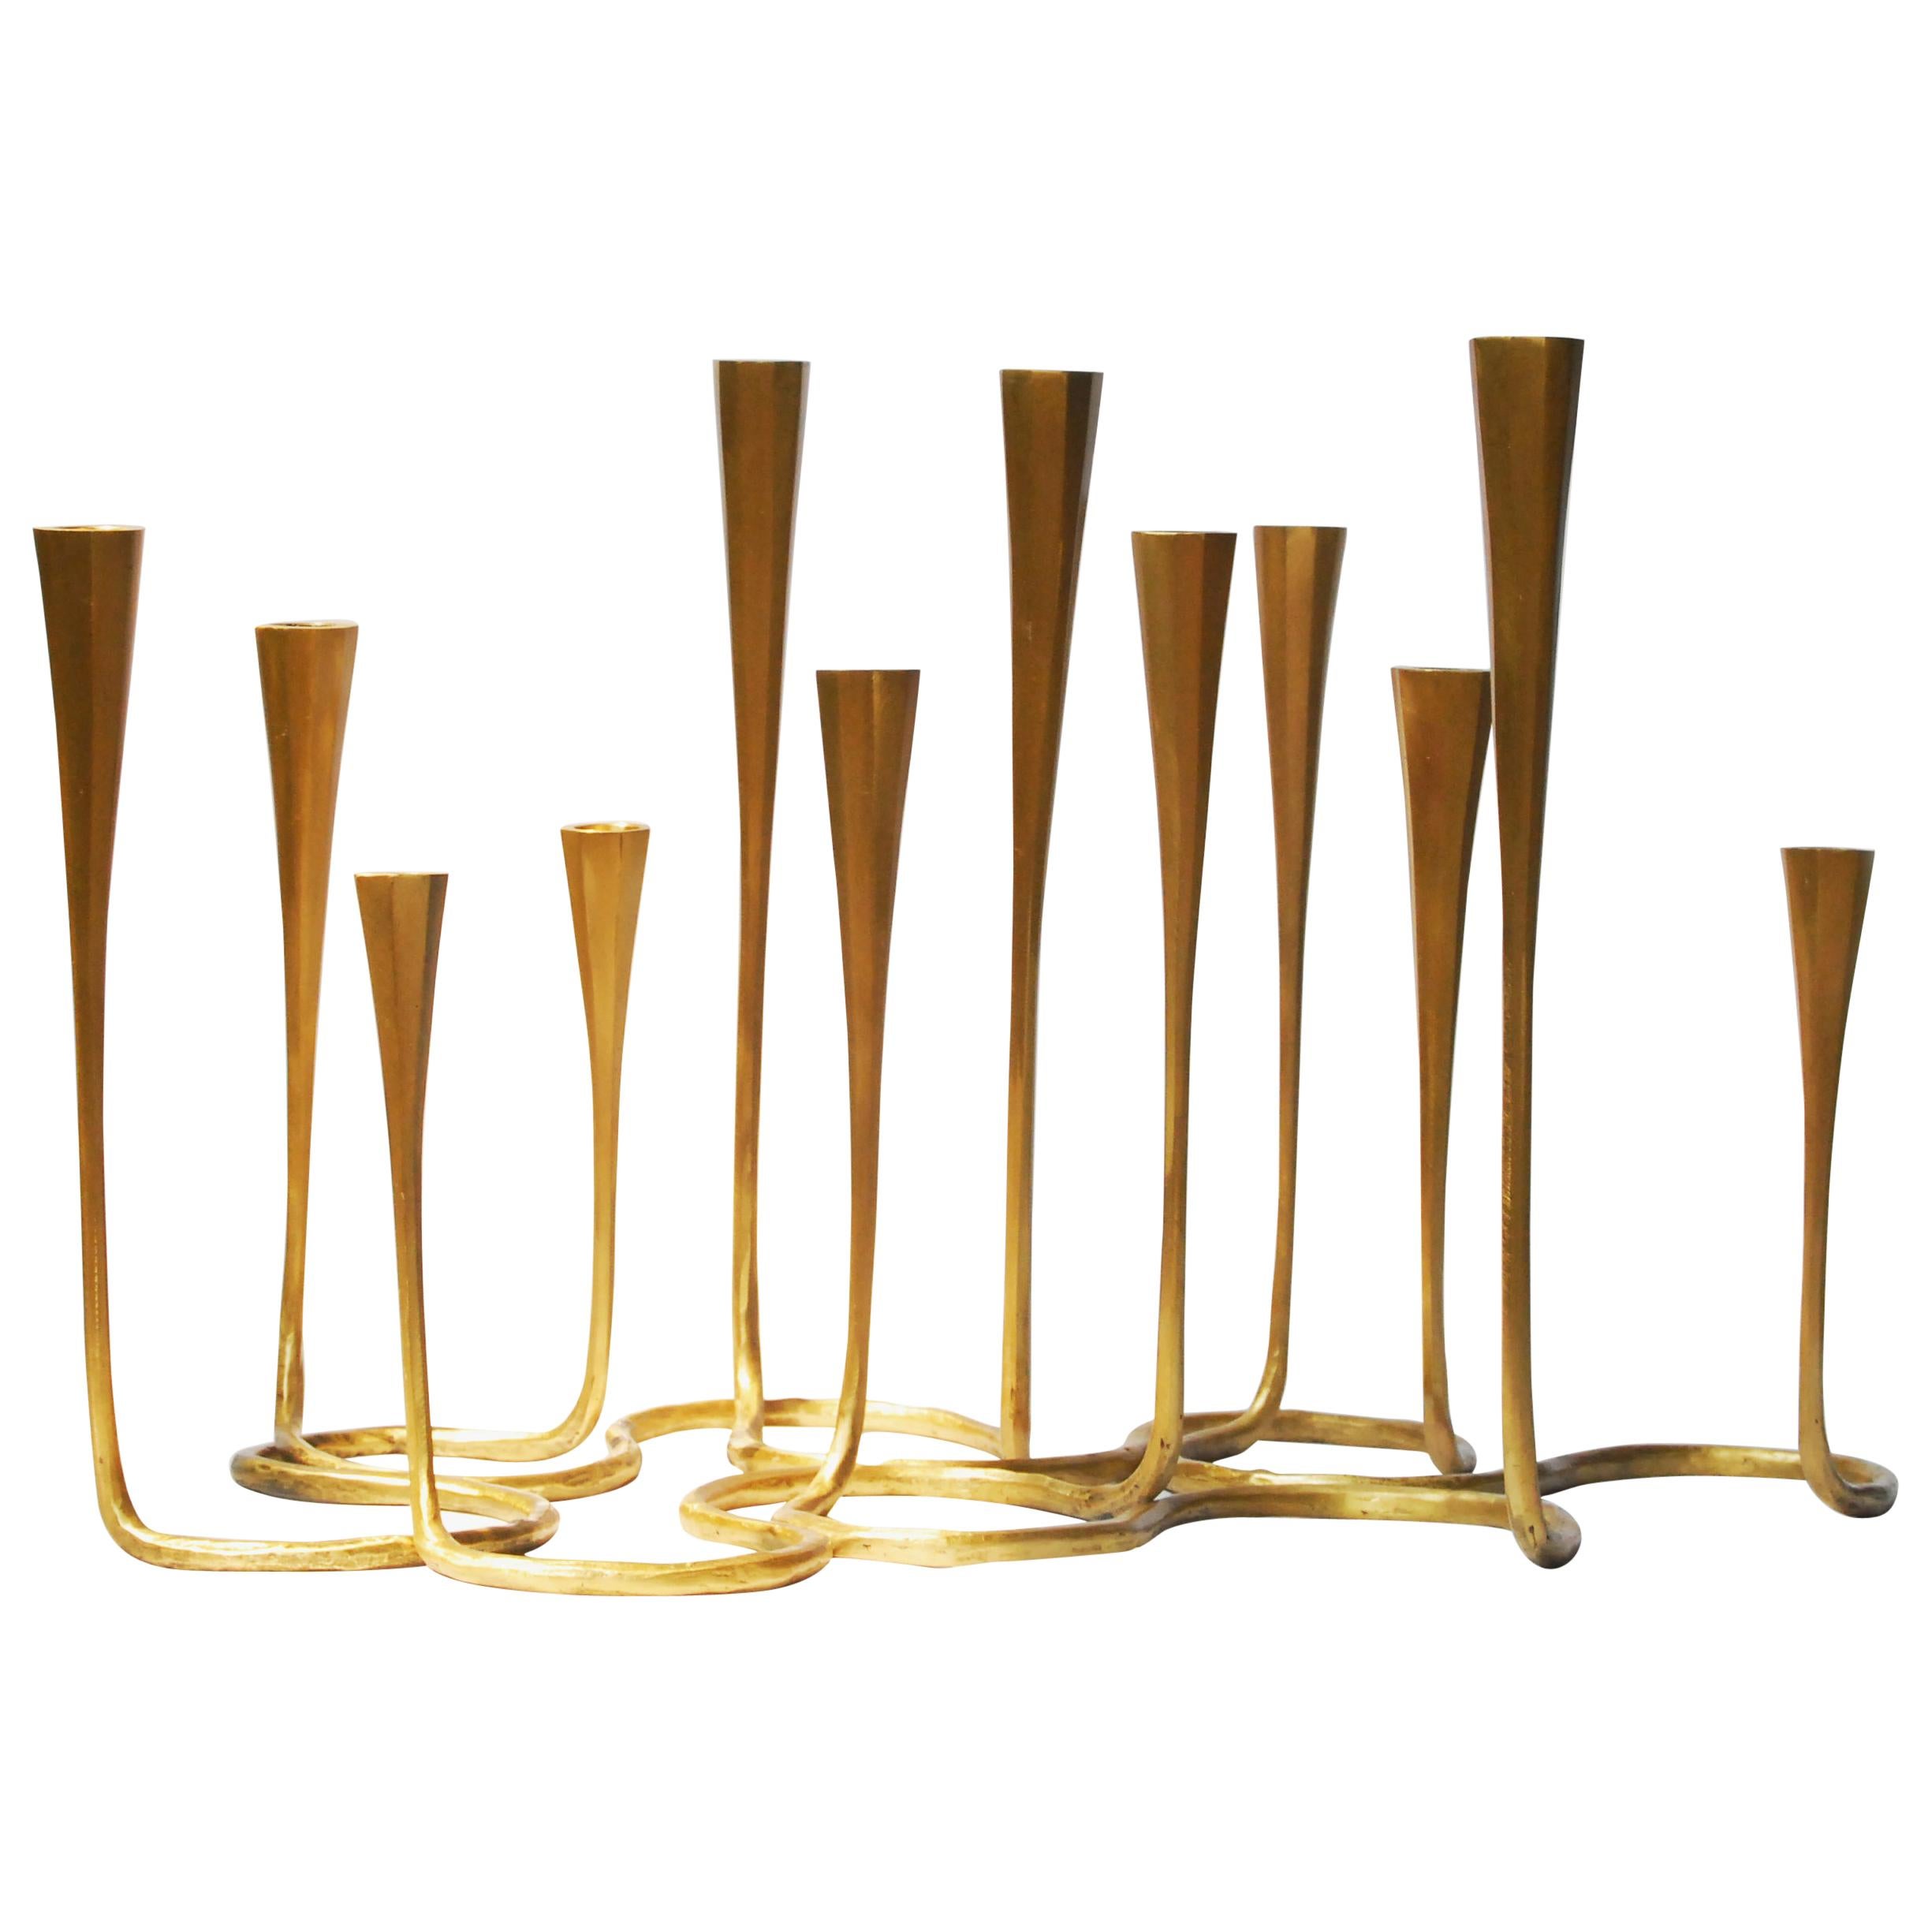 Cast Bronze Daisy Candlestands in Matte Gold Bronze Finish Small by Elan Atelier